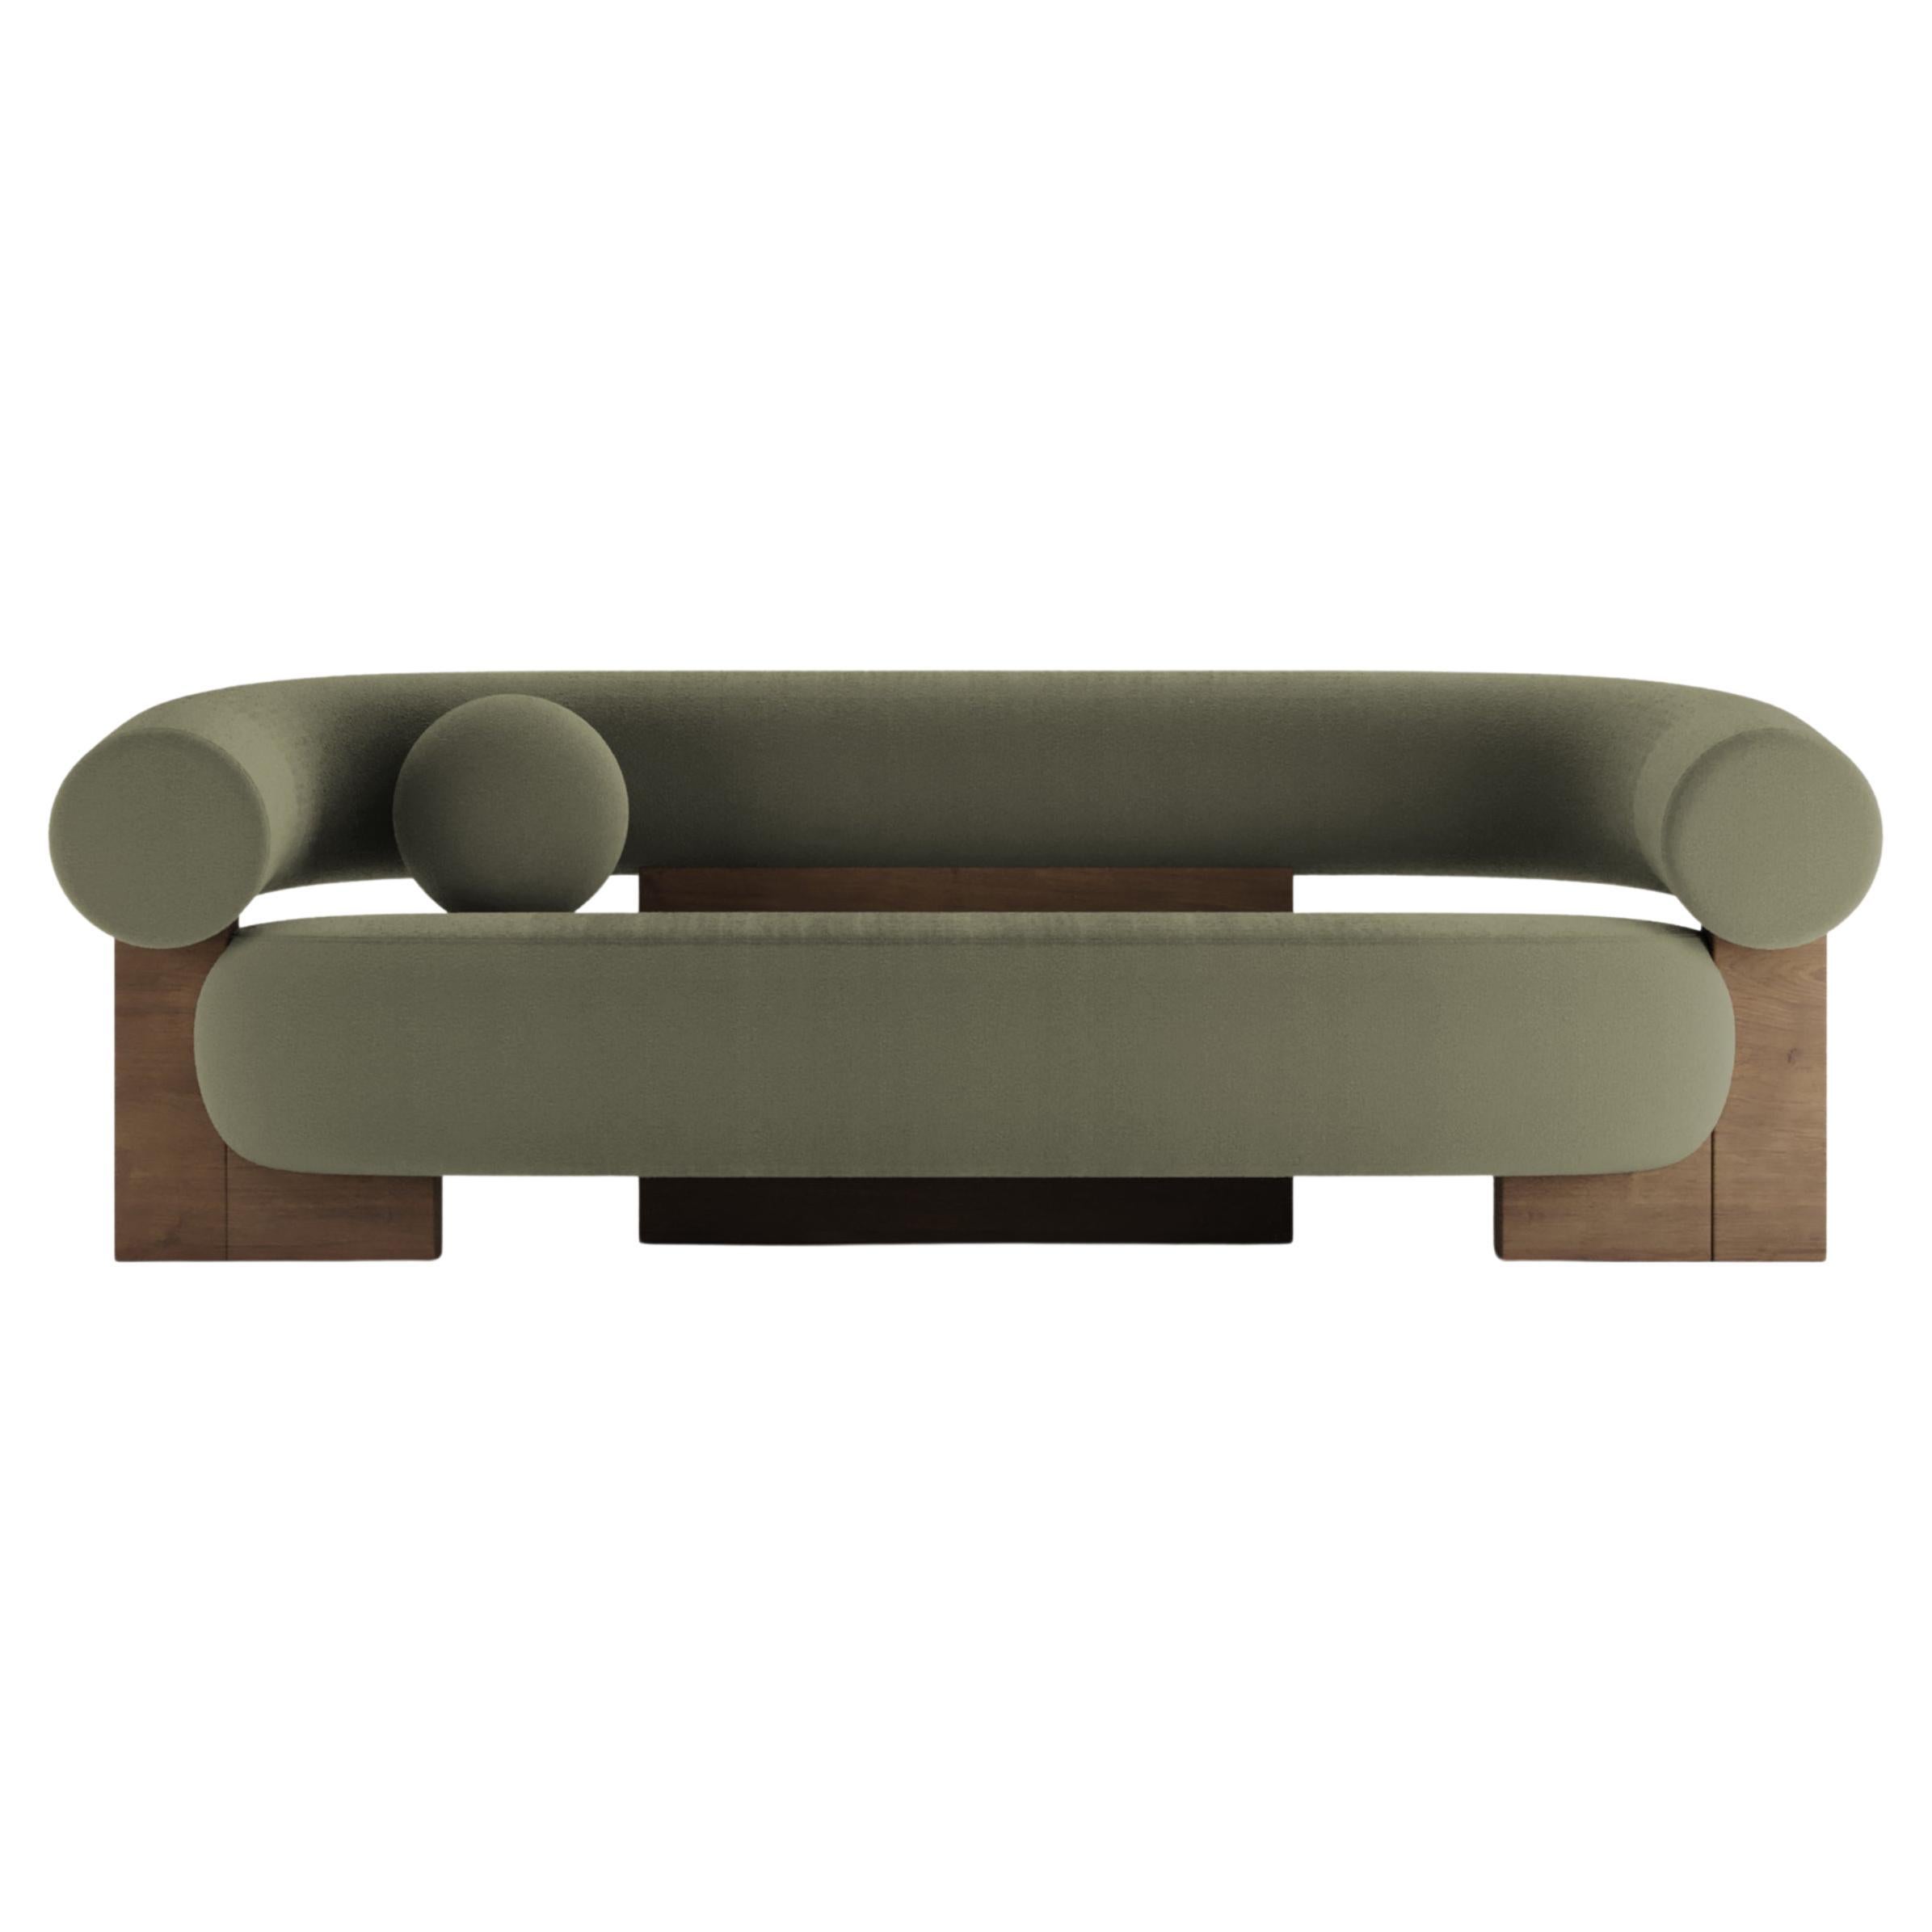 Contemporary Modern Cassete Sofa in Olive & Wood by Collector Studio For Sale